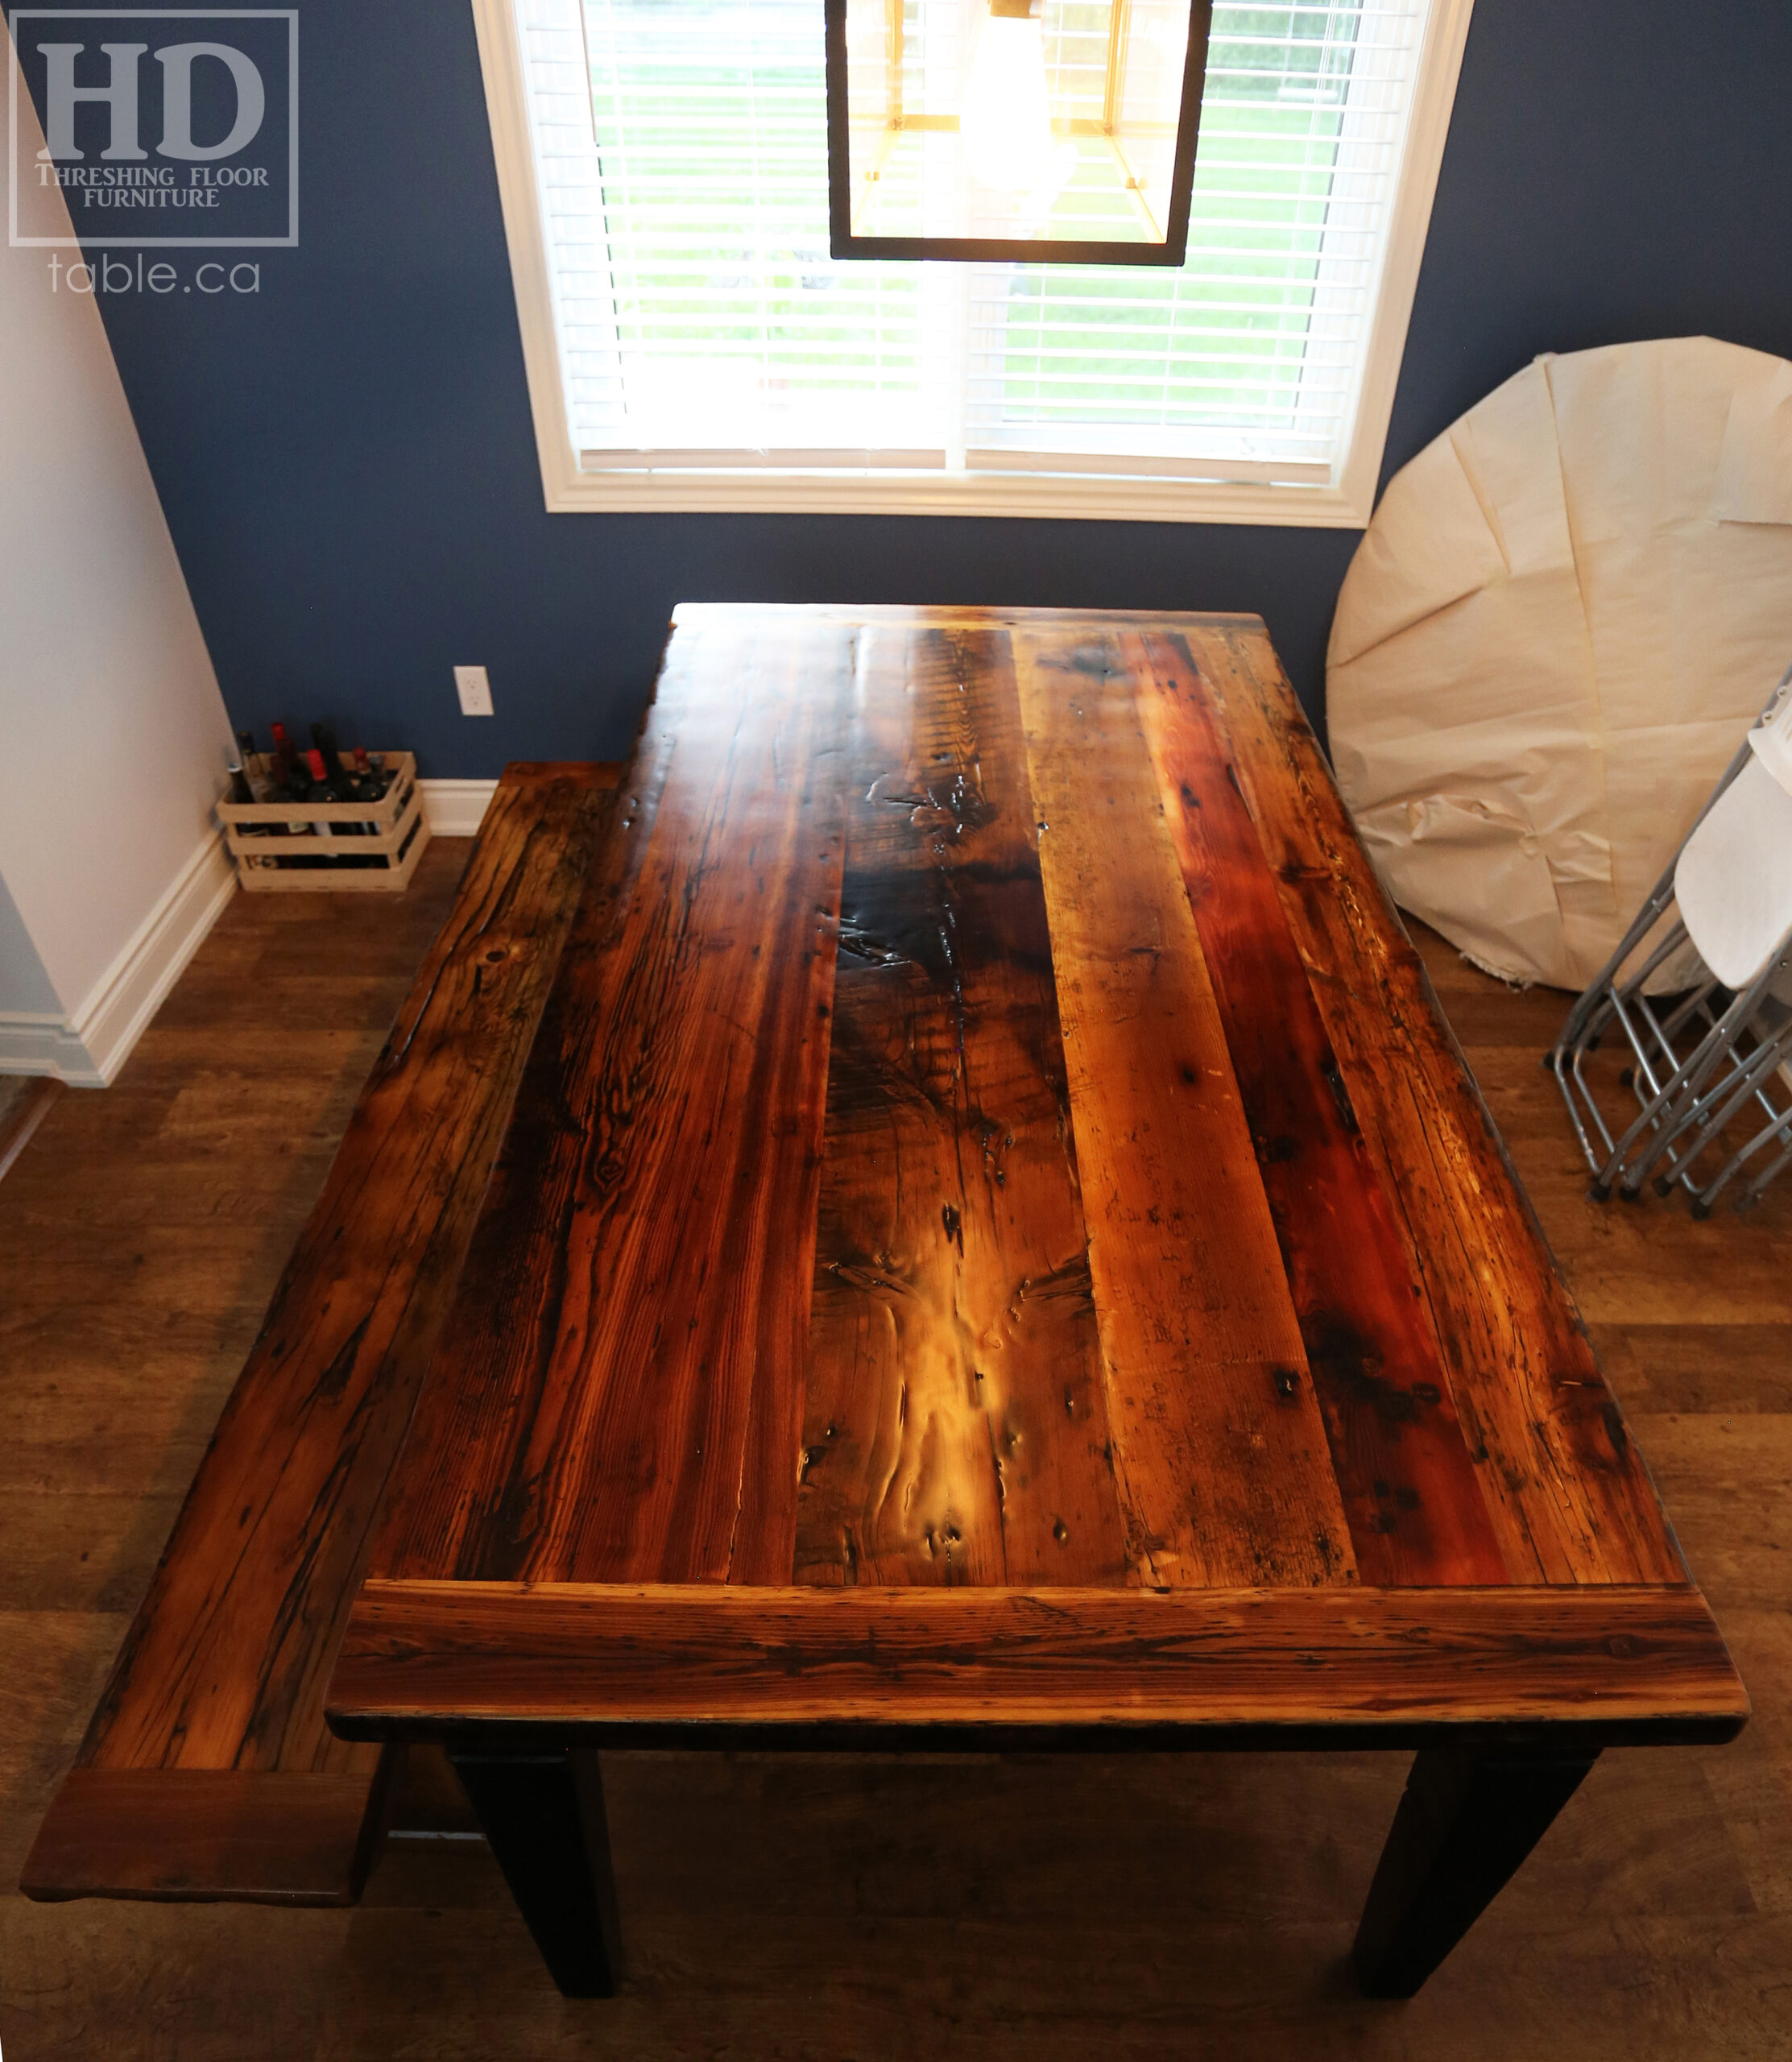 Rustic Harvest Table & Bench made from Ontario Barnwood with Epoxy + Polyurethane Finish / www.table.ca